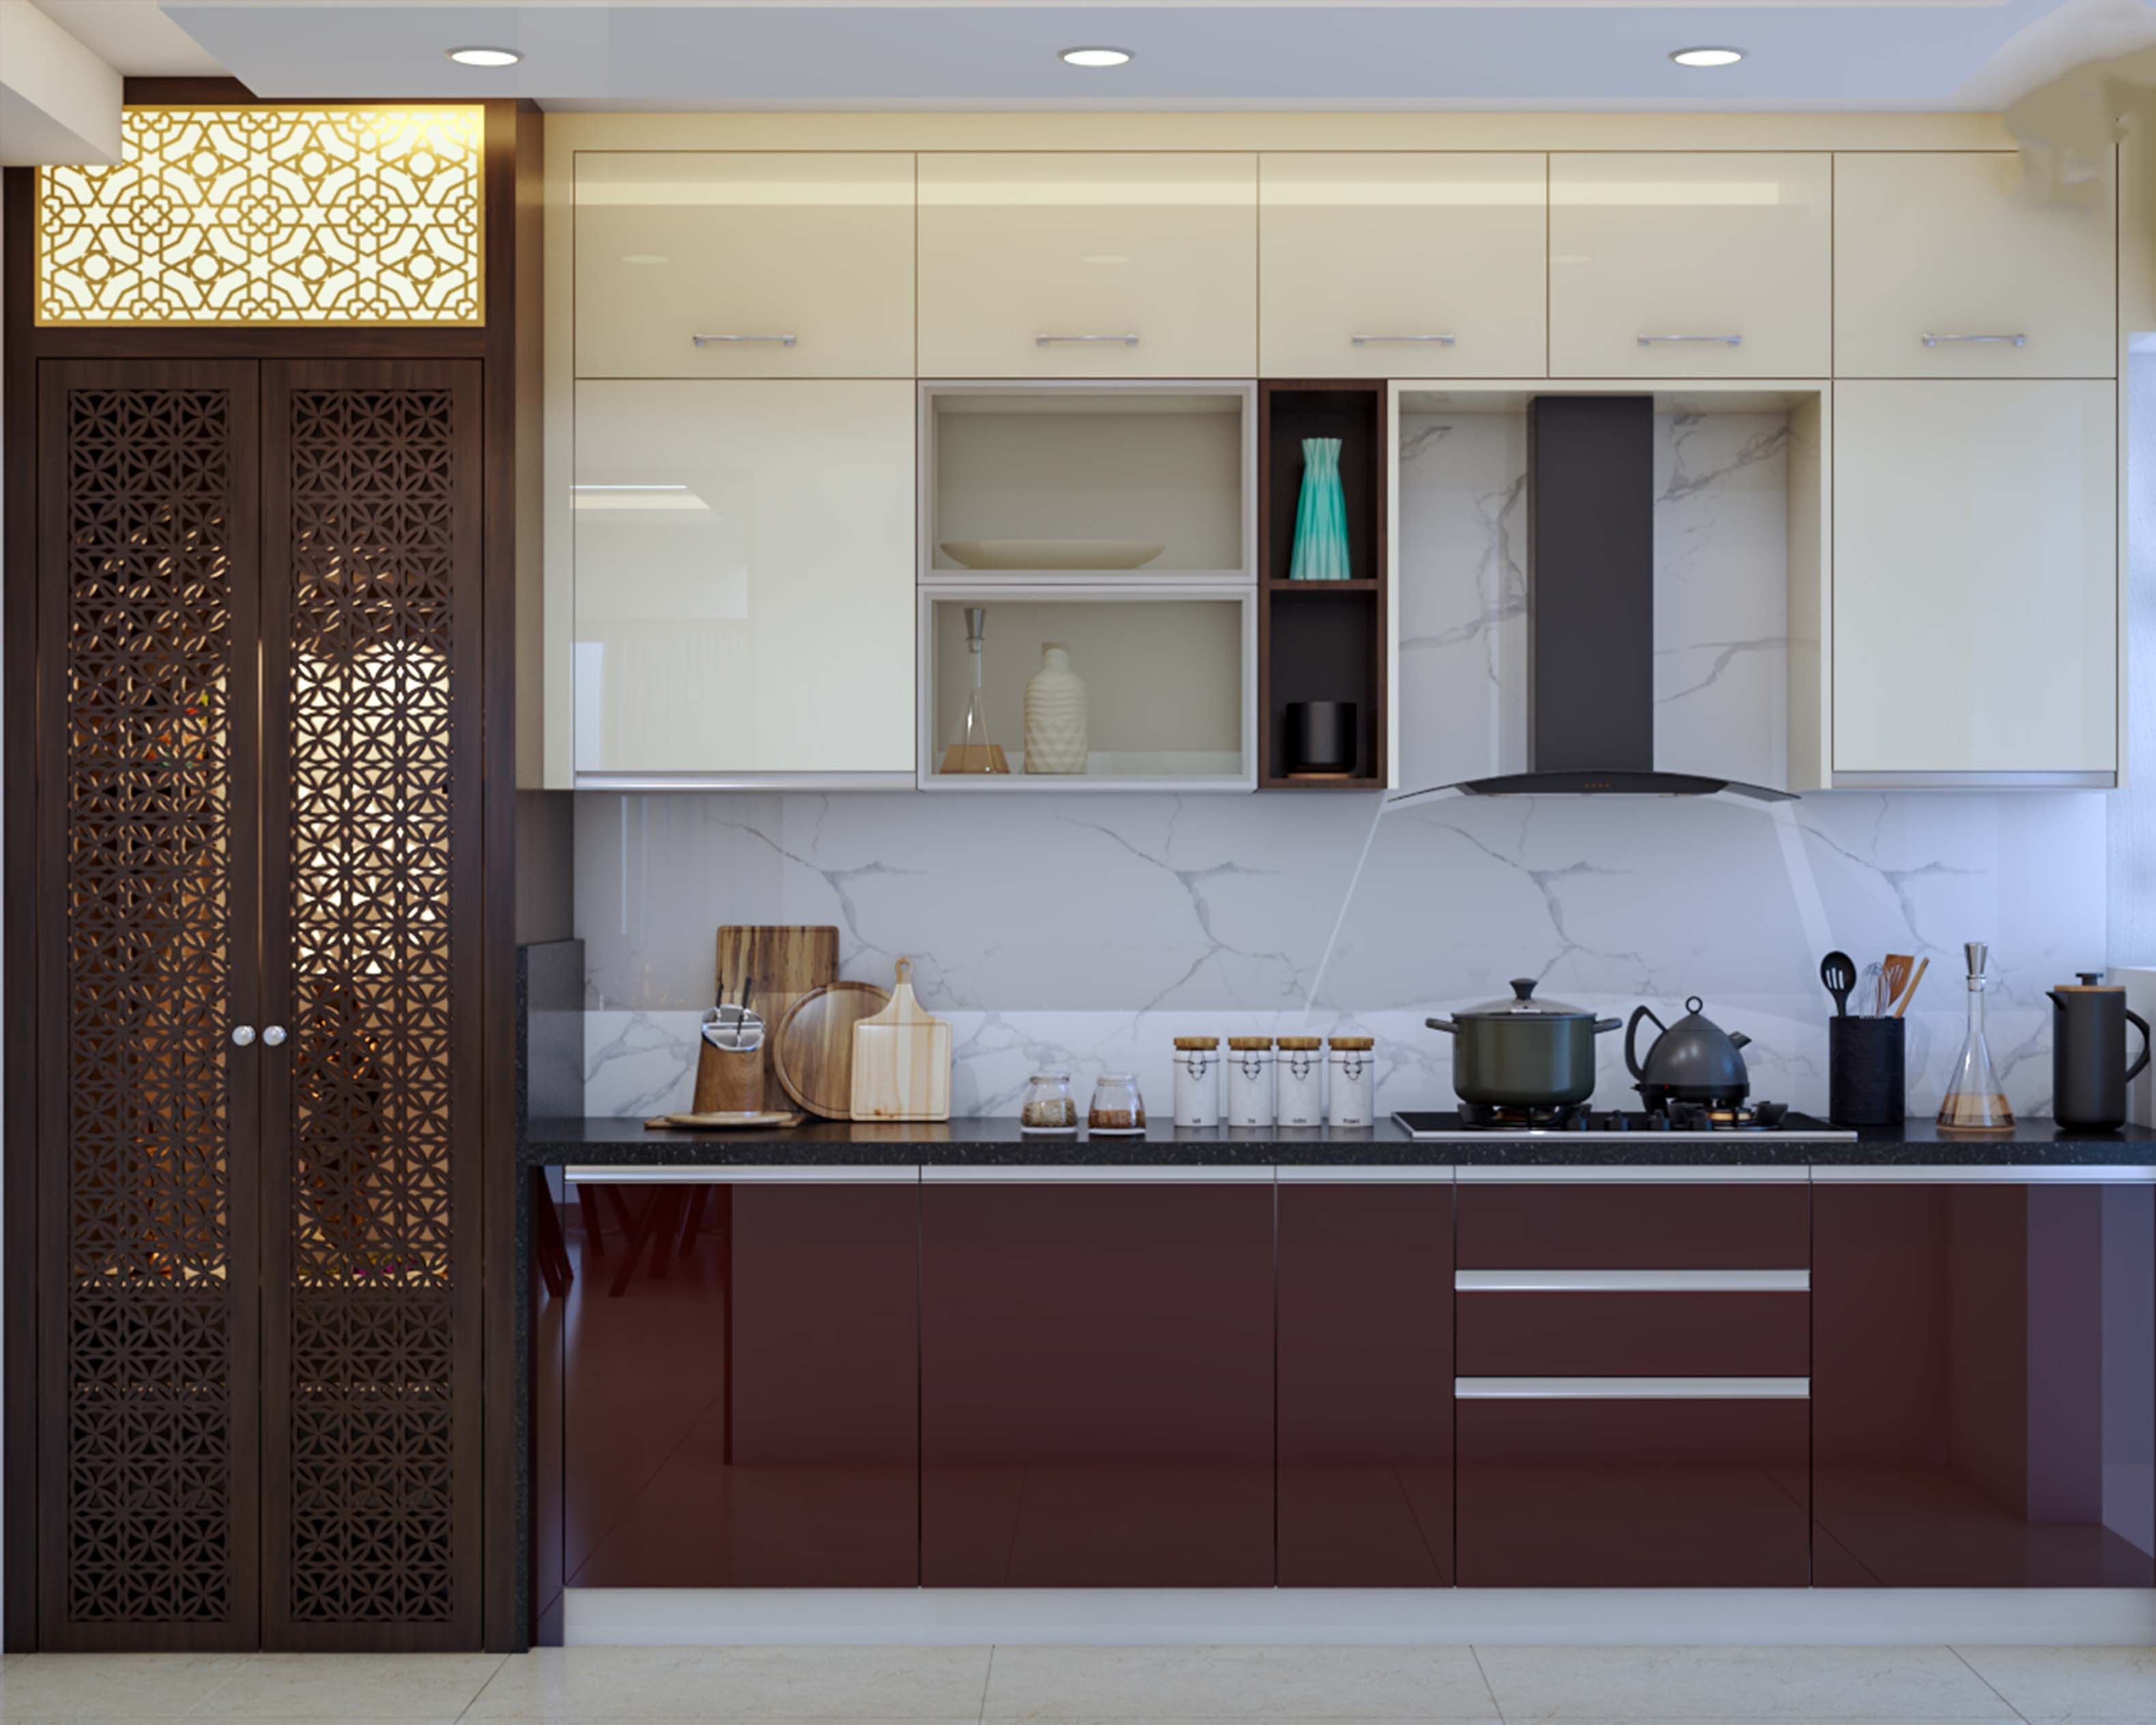 Contemporary Modular Open Kitchen Design With Cream And Maroon Cabinets